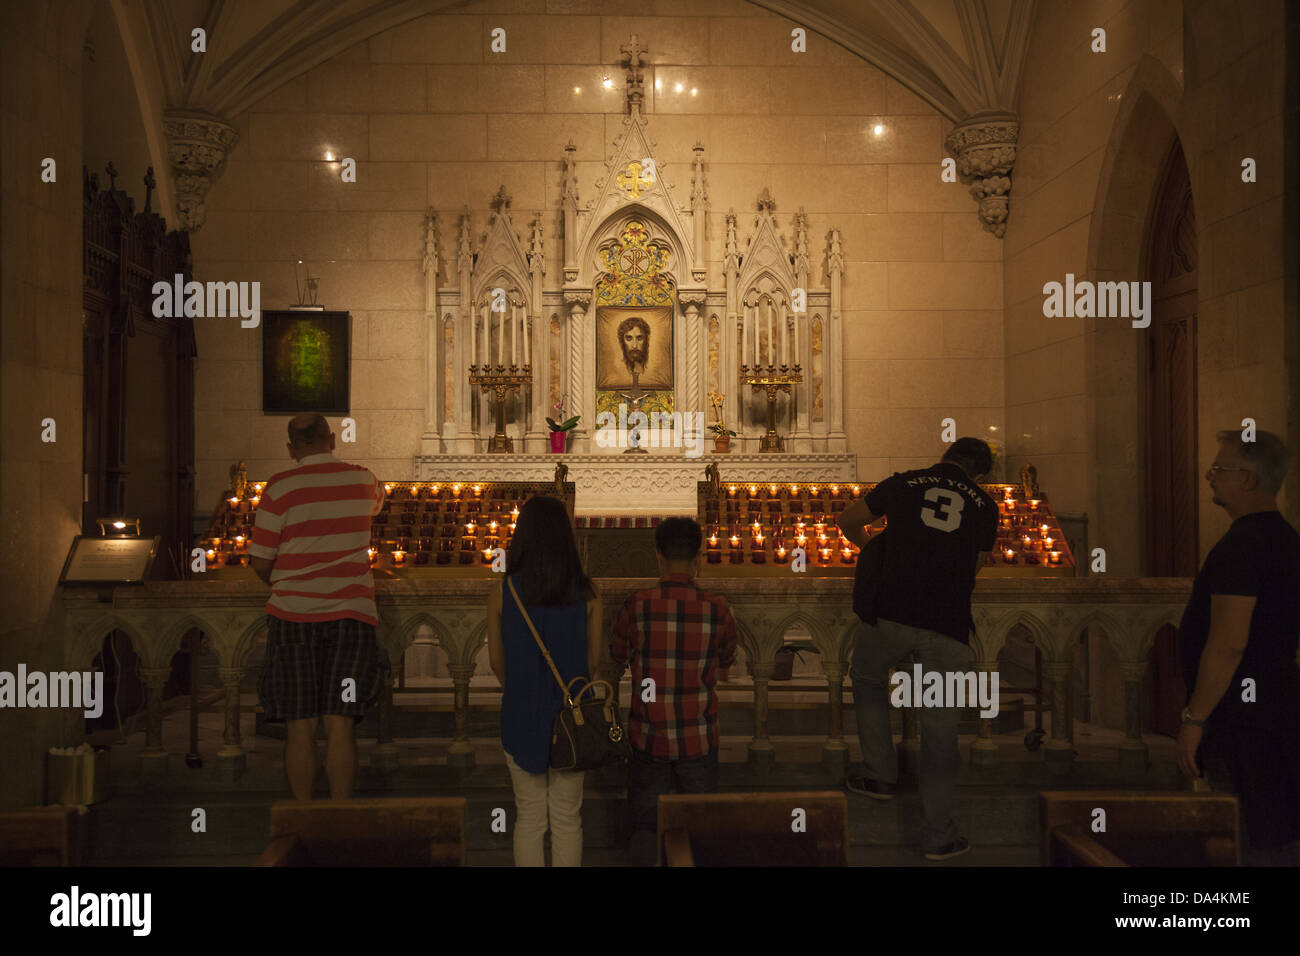 People praying, Side Alter, St.Patrick's Cathedral, Manhattan, NYC. Stock Photo